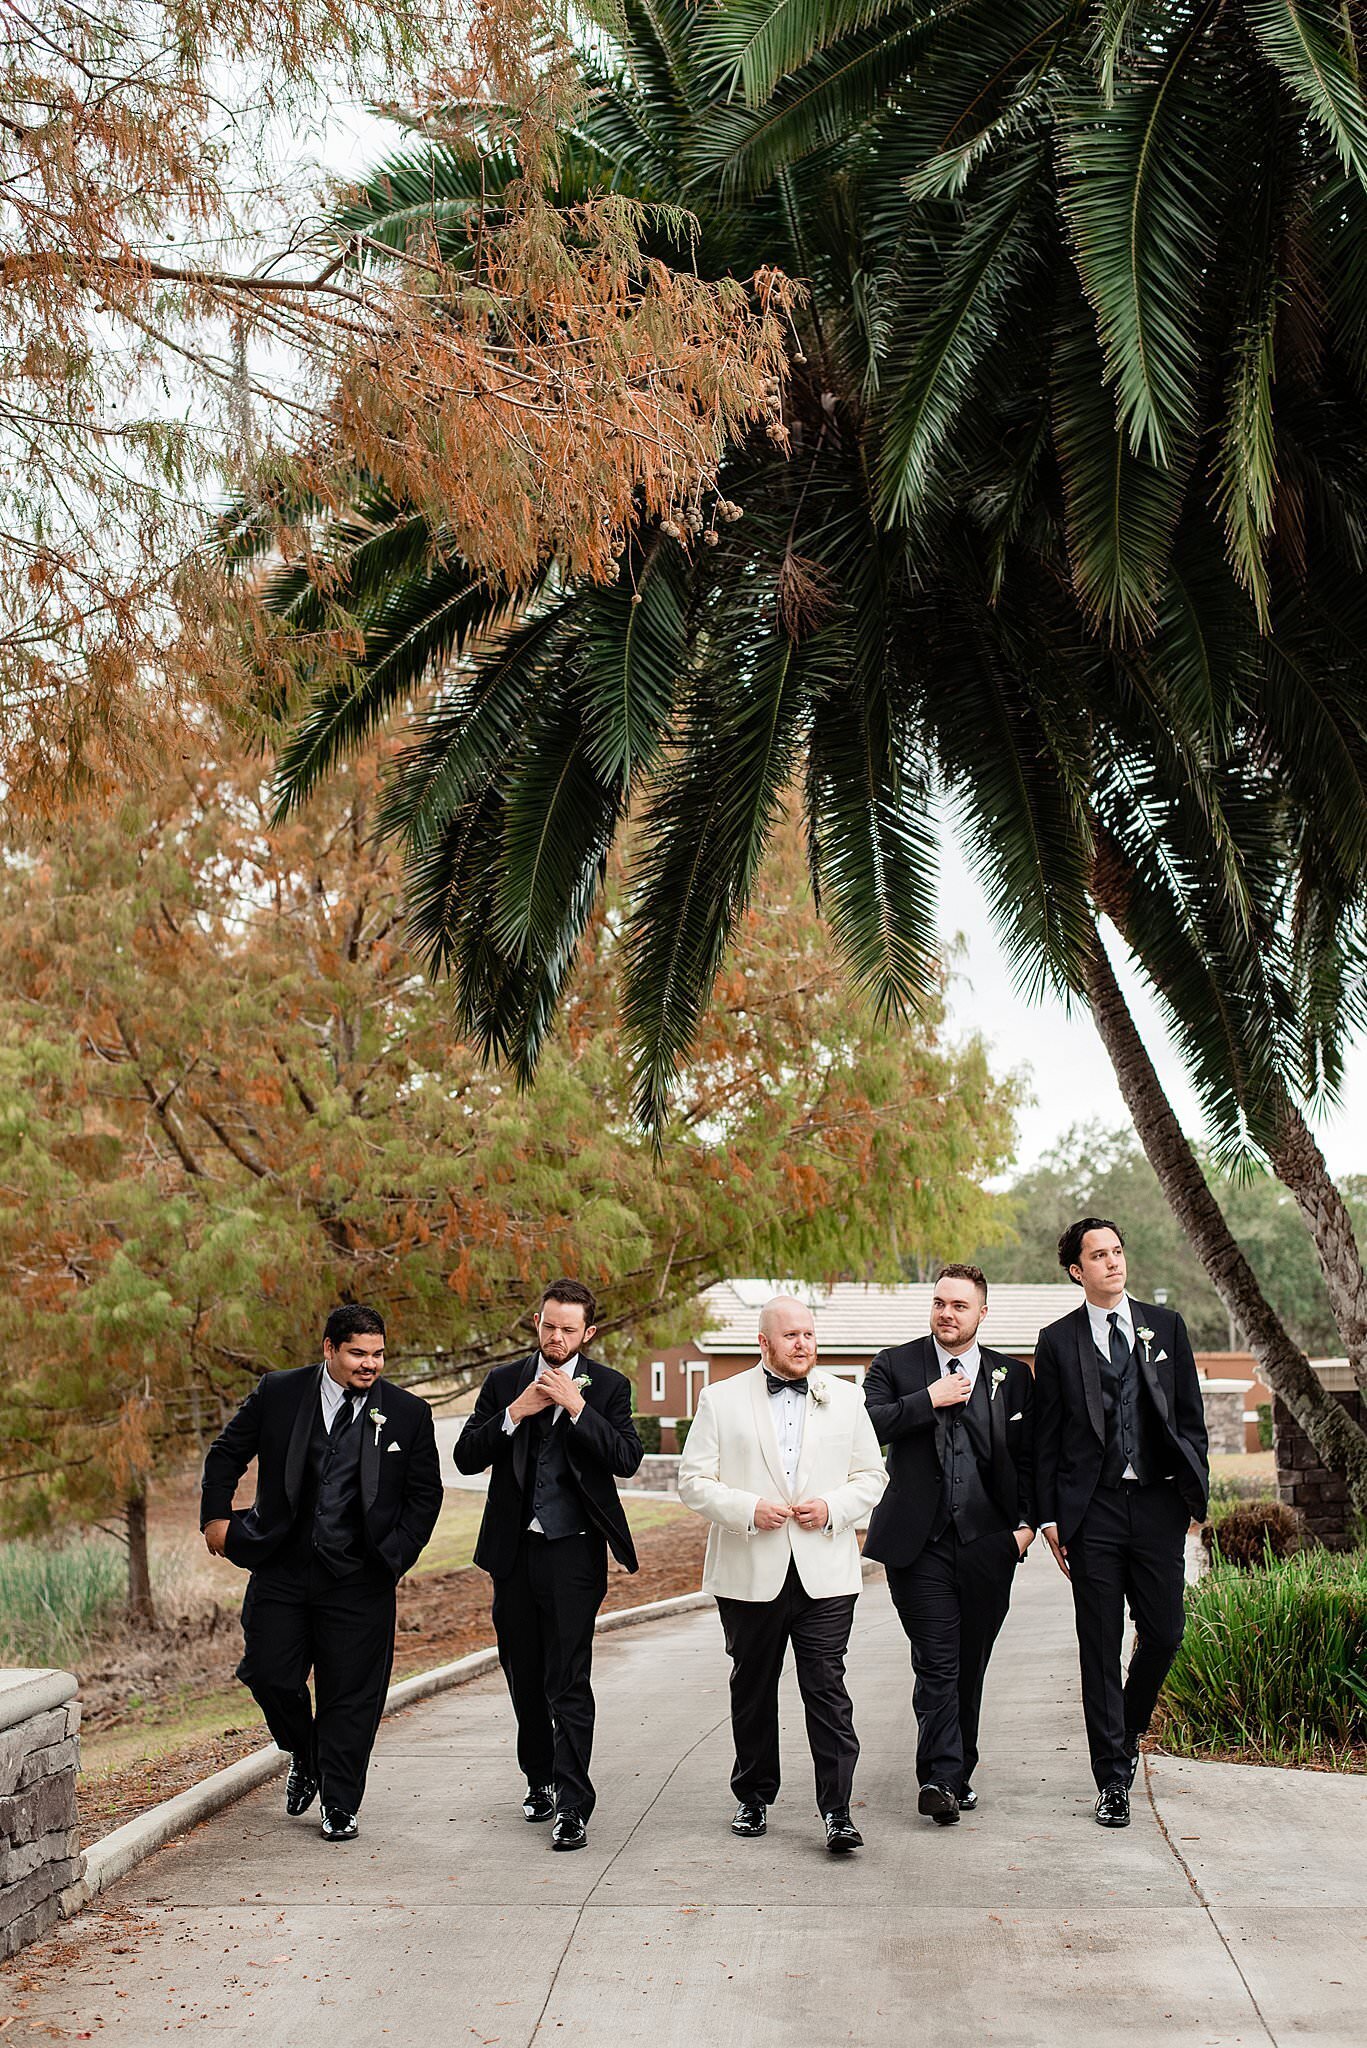 Groom in an ivory dinner jacket walking with his groomsmen who are wearing classic black tuxedos with palm trees around them